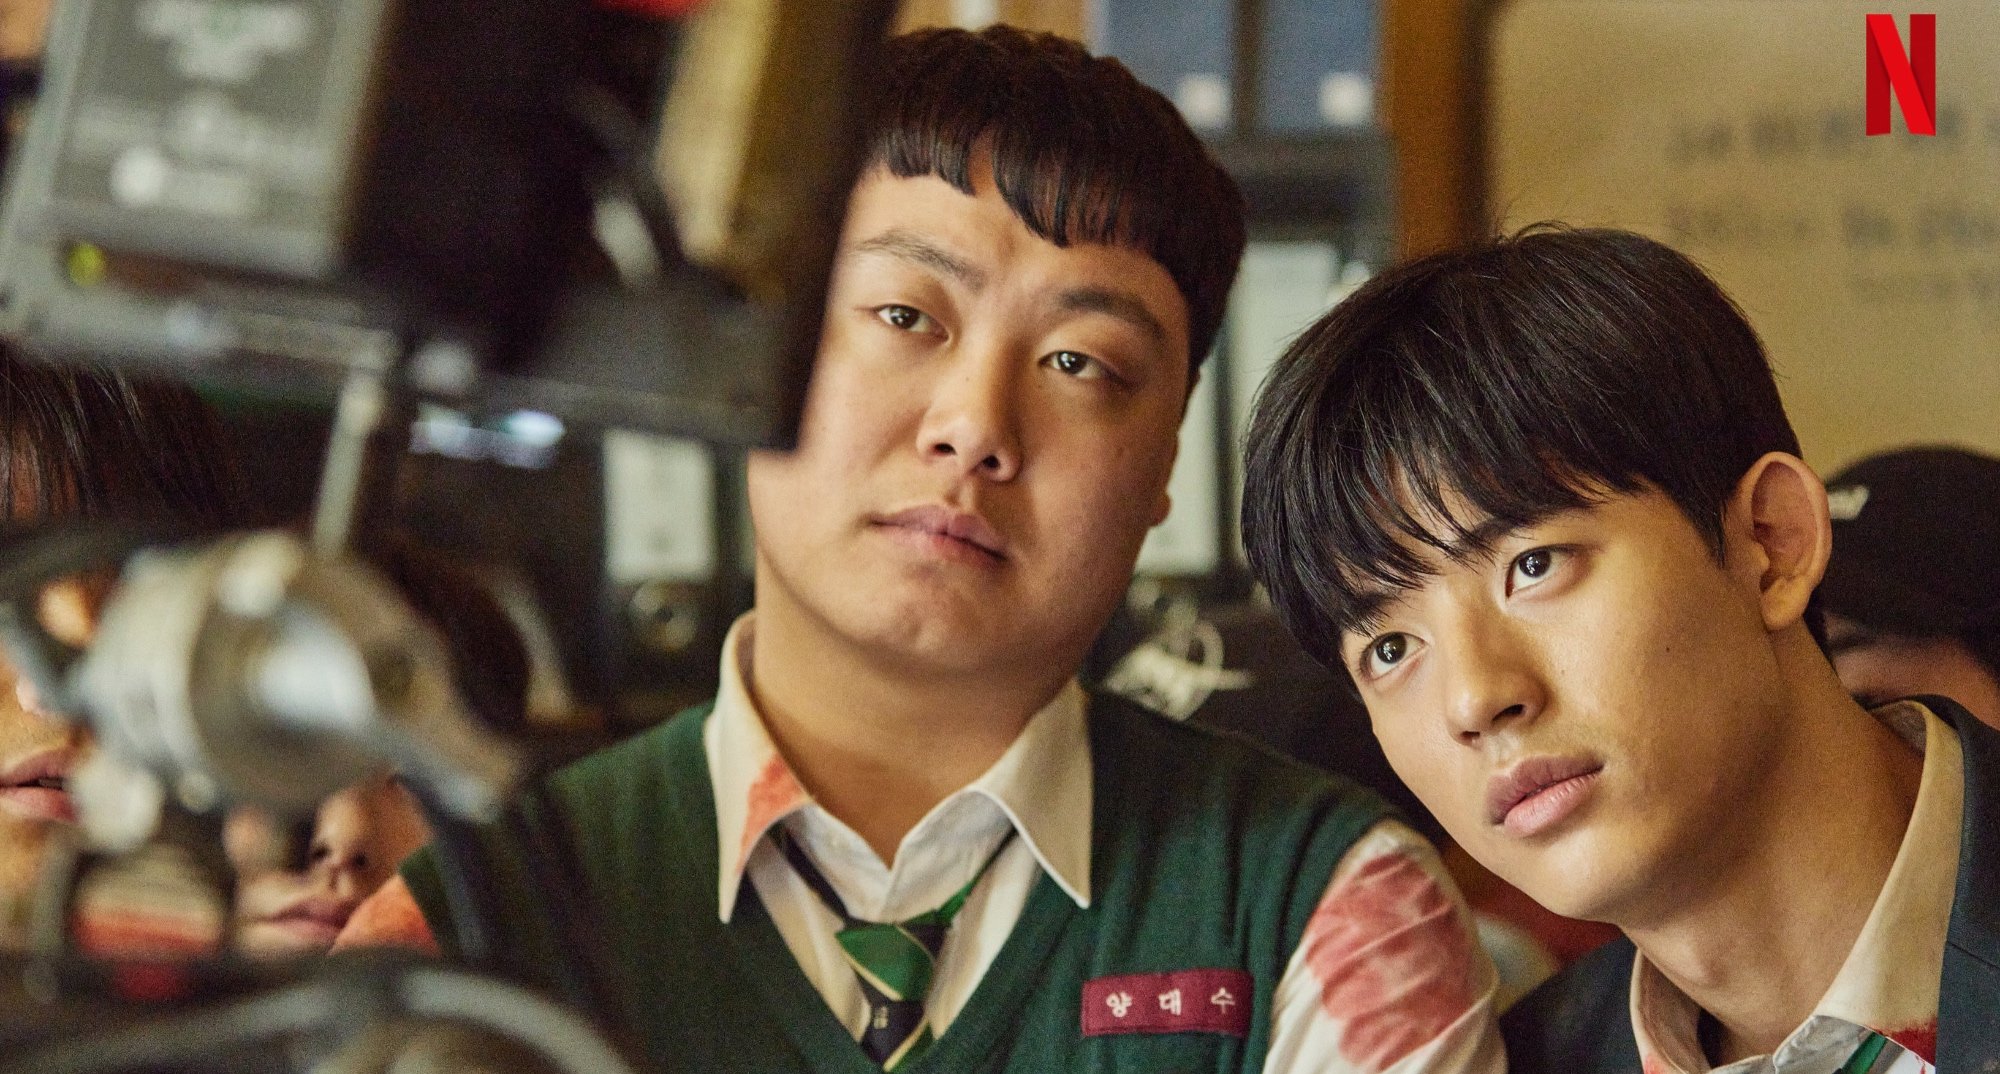 Actors Im Jae-hyuk and Park Solomon in 'All of Us Are Dead' looking at camera monitor.